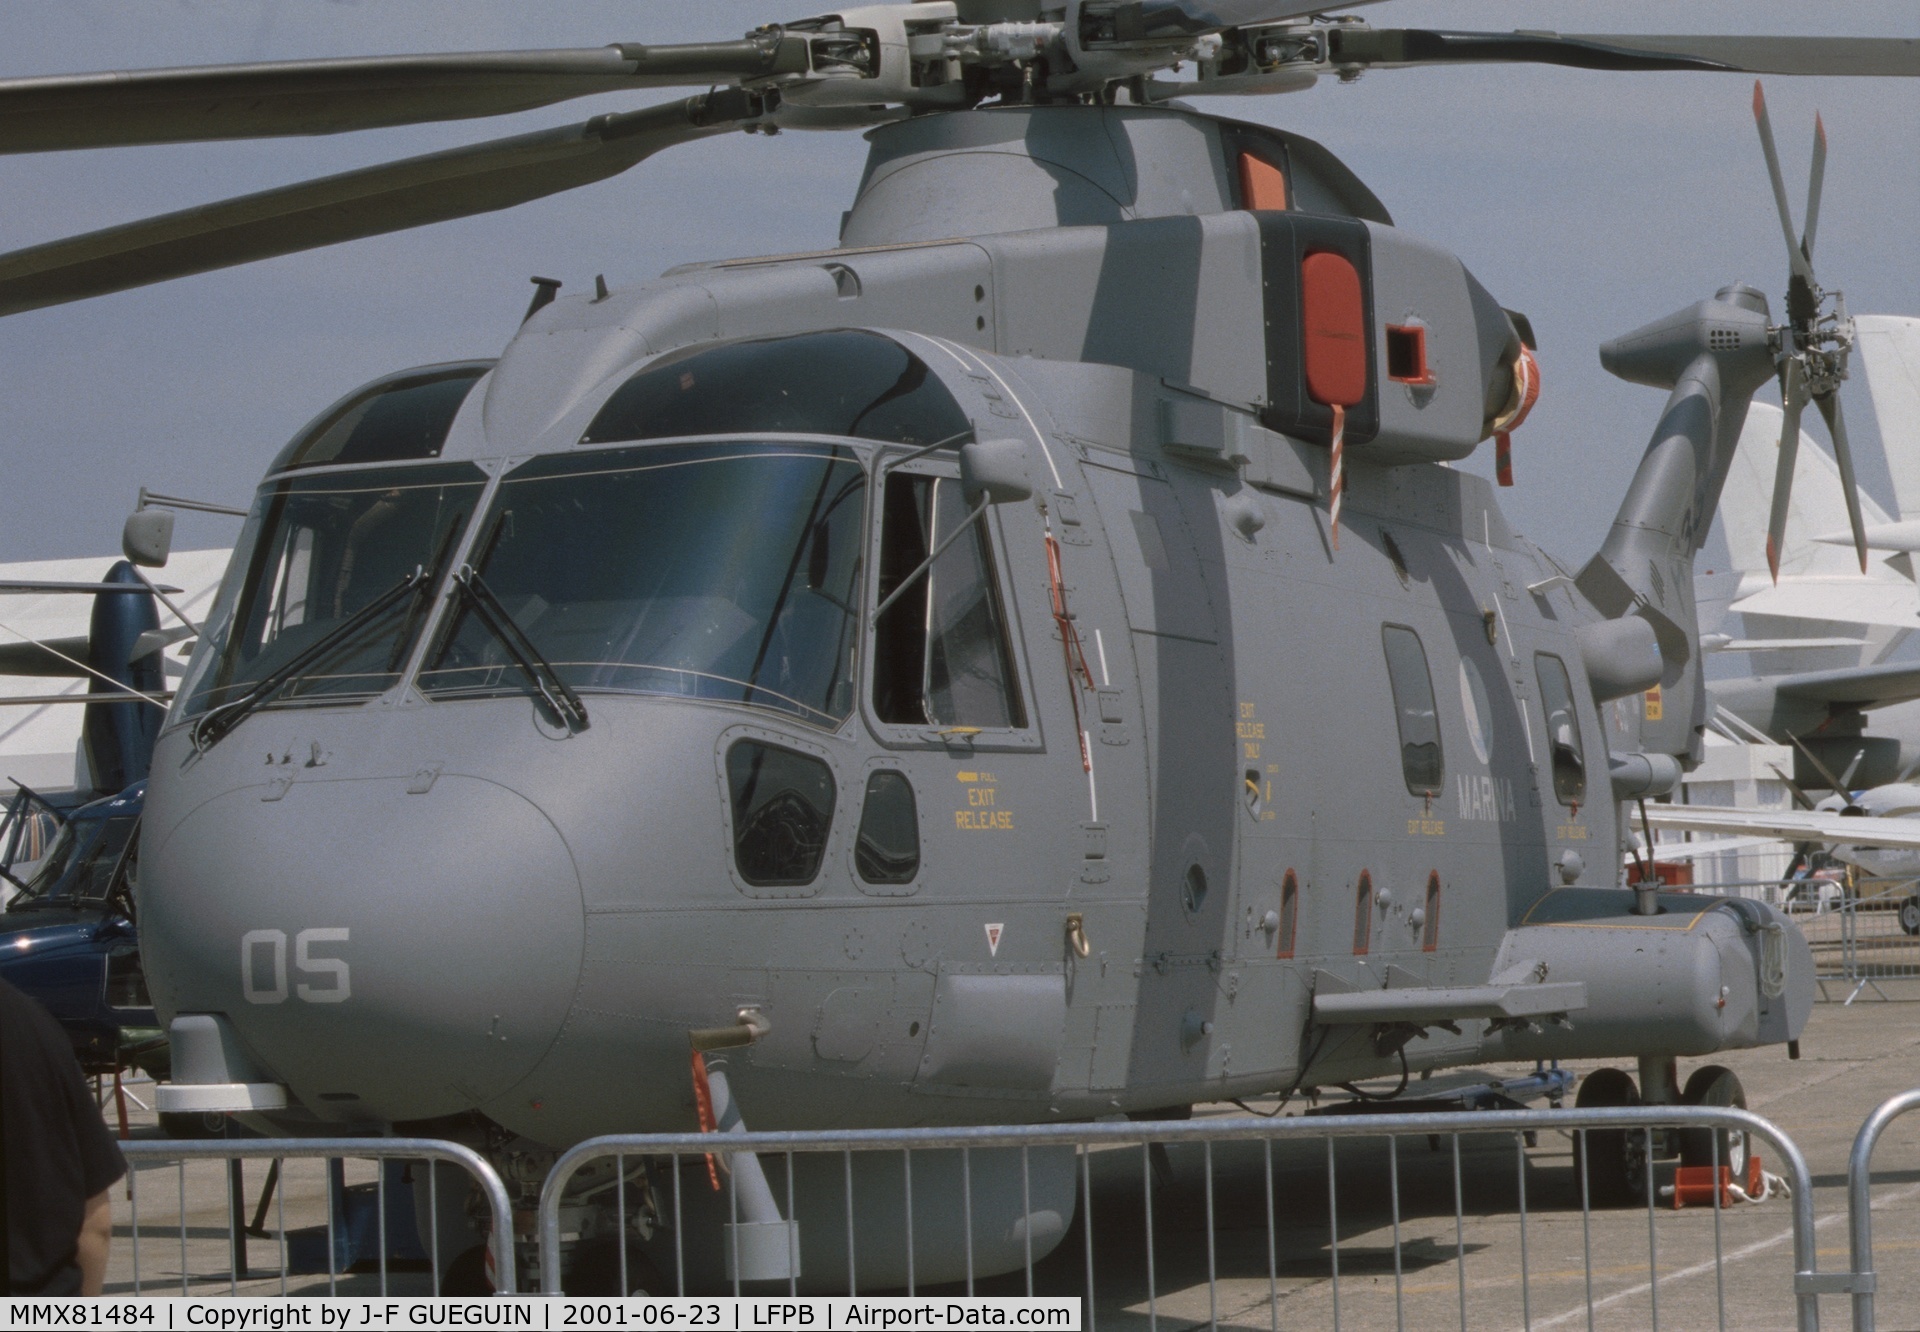 MMX81484, EHI SH-101A (EH-101MP Mk110) C/N 110005, On display at 2001 Paris-Le Bourget airshow.